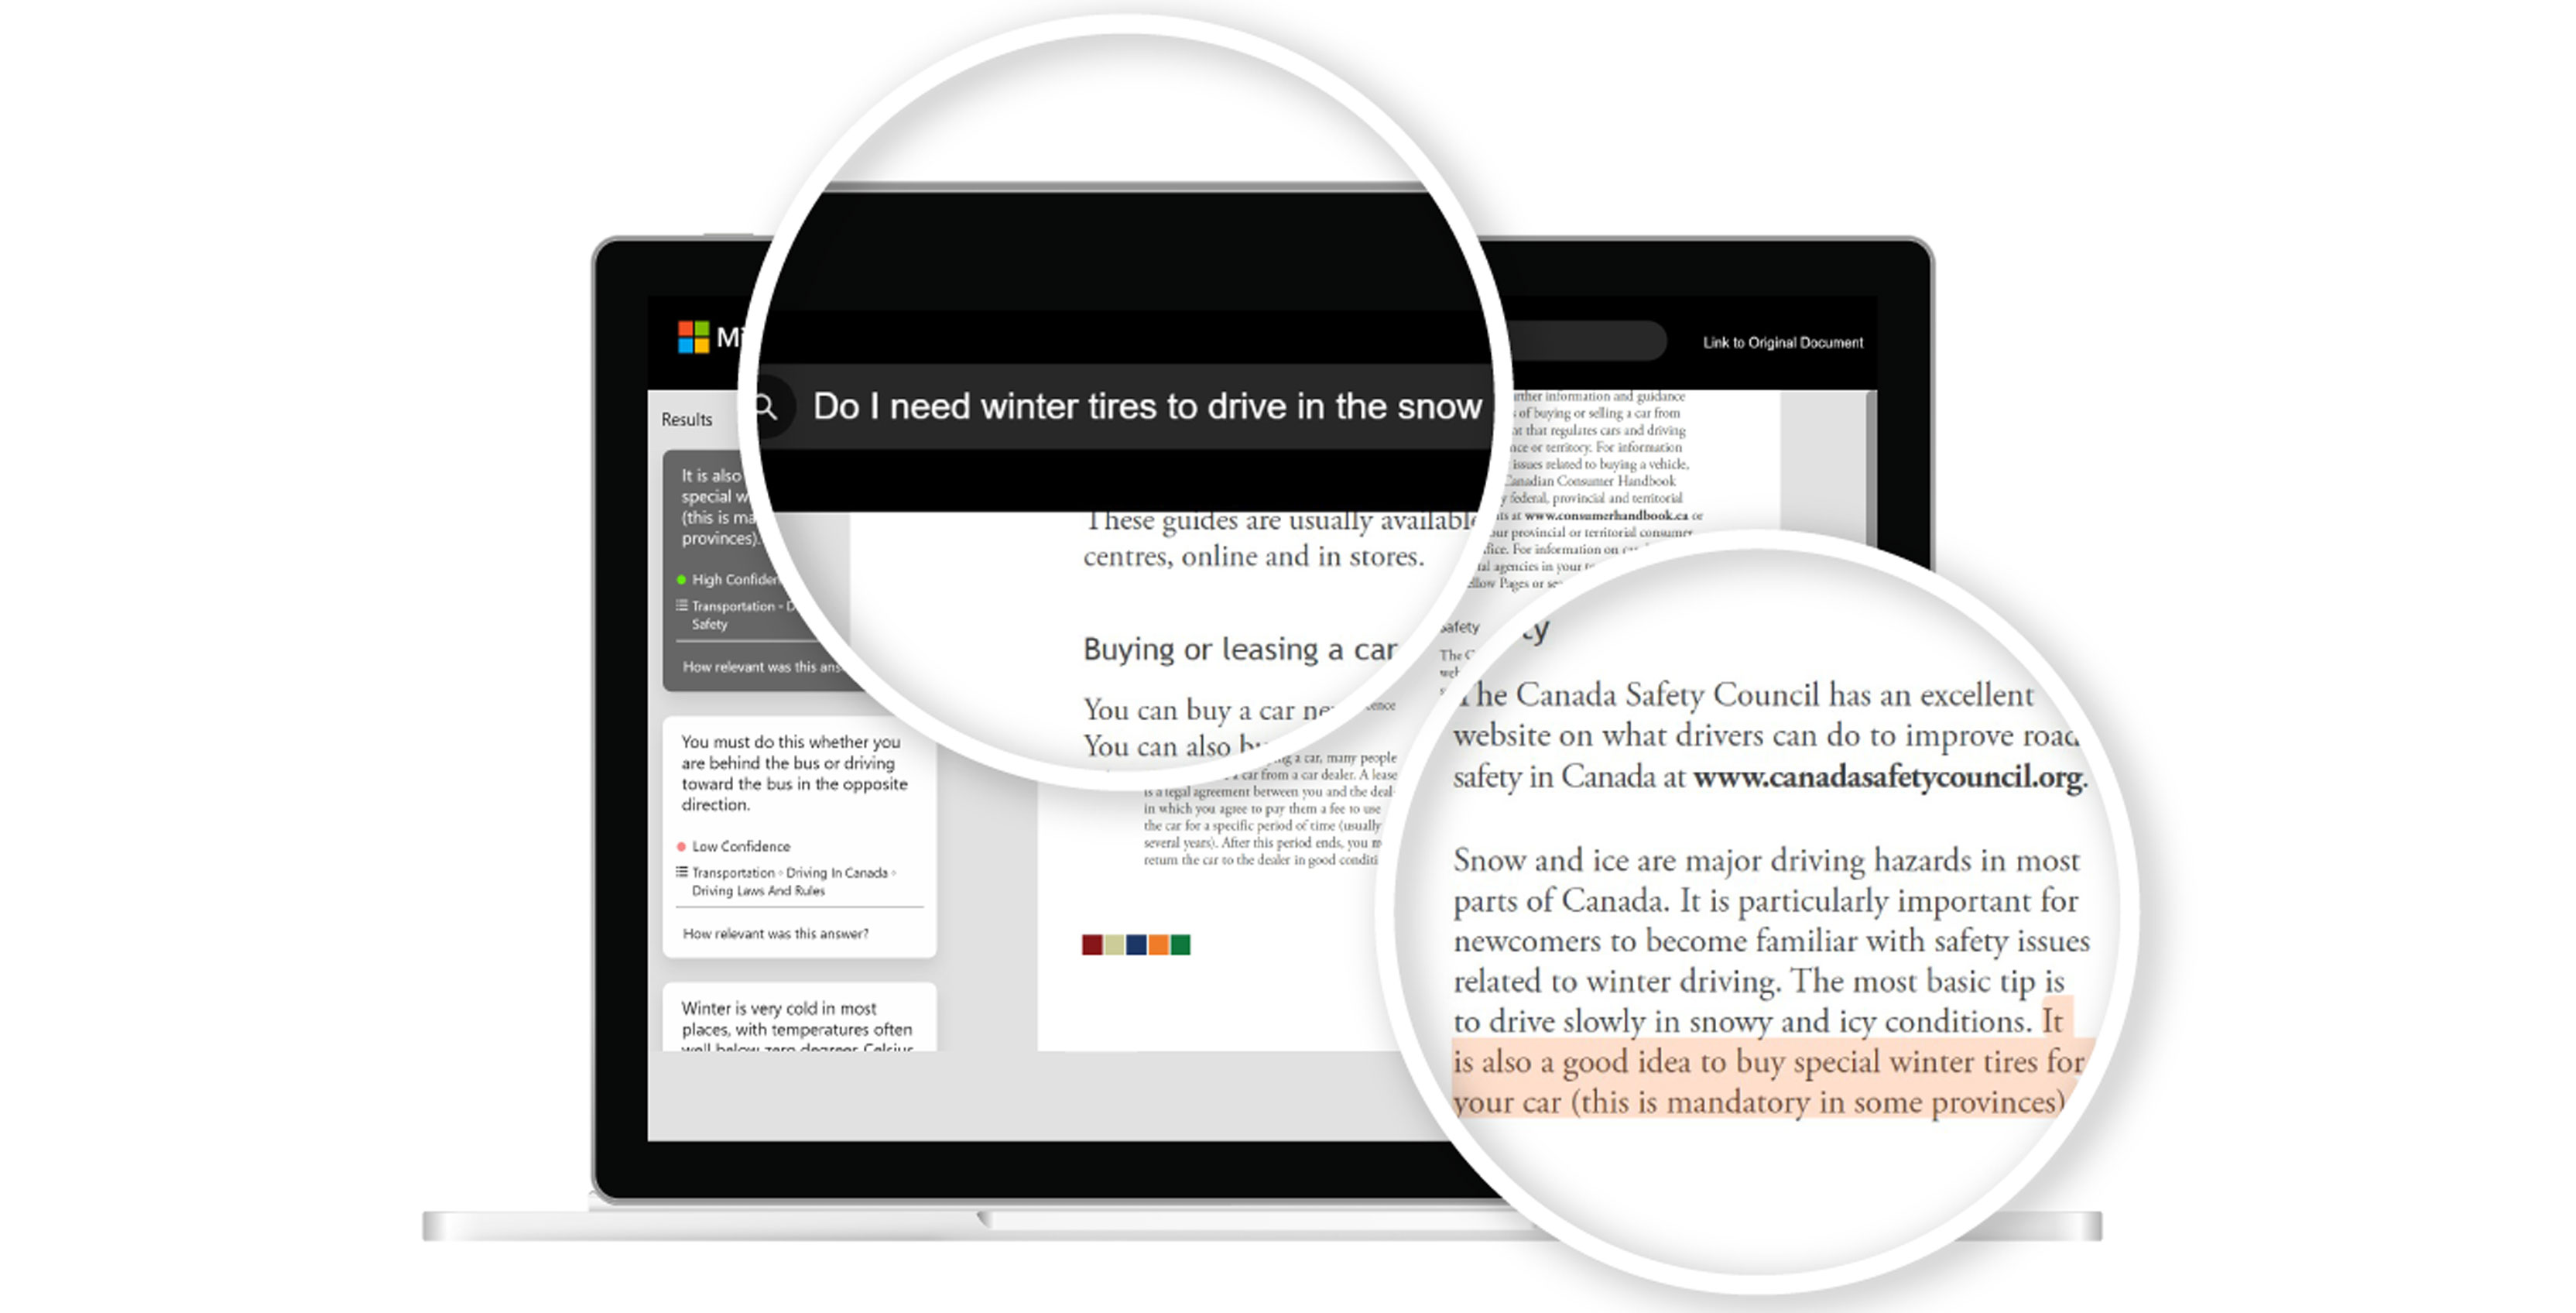 Microsoft creates new tool to find information within a document quickly